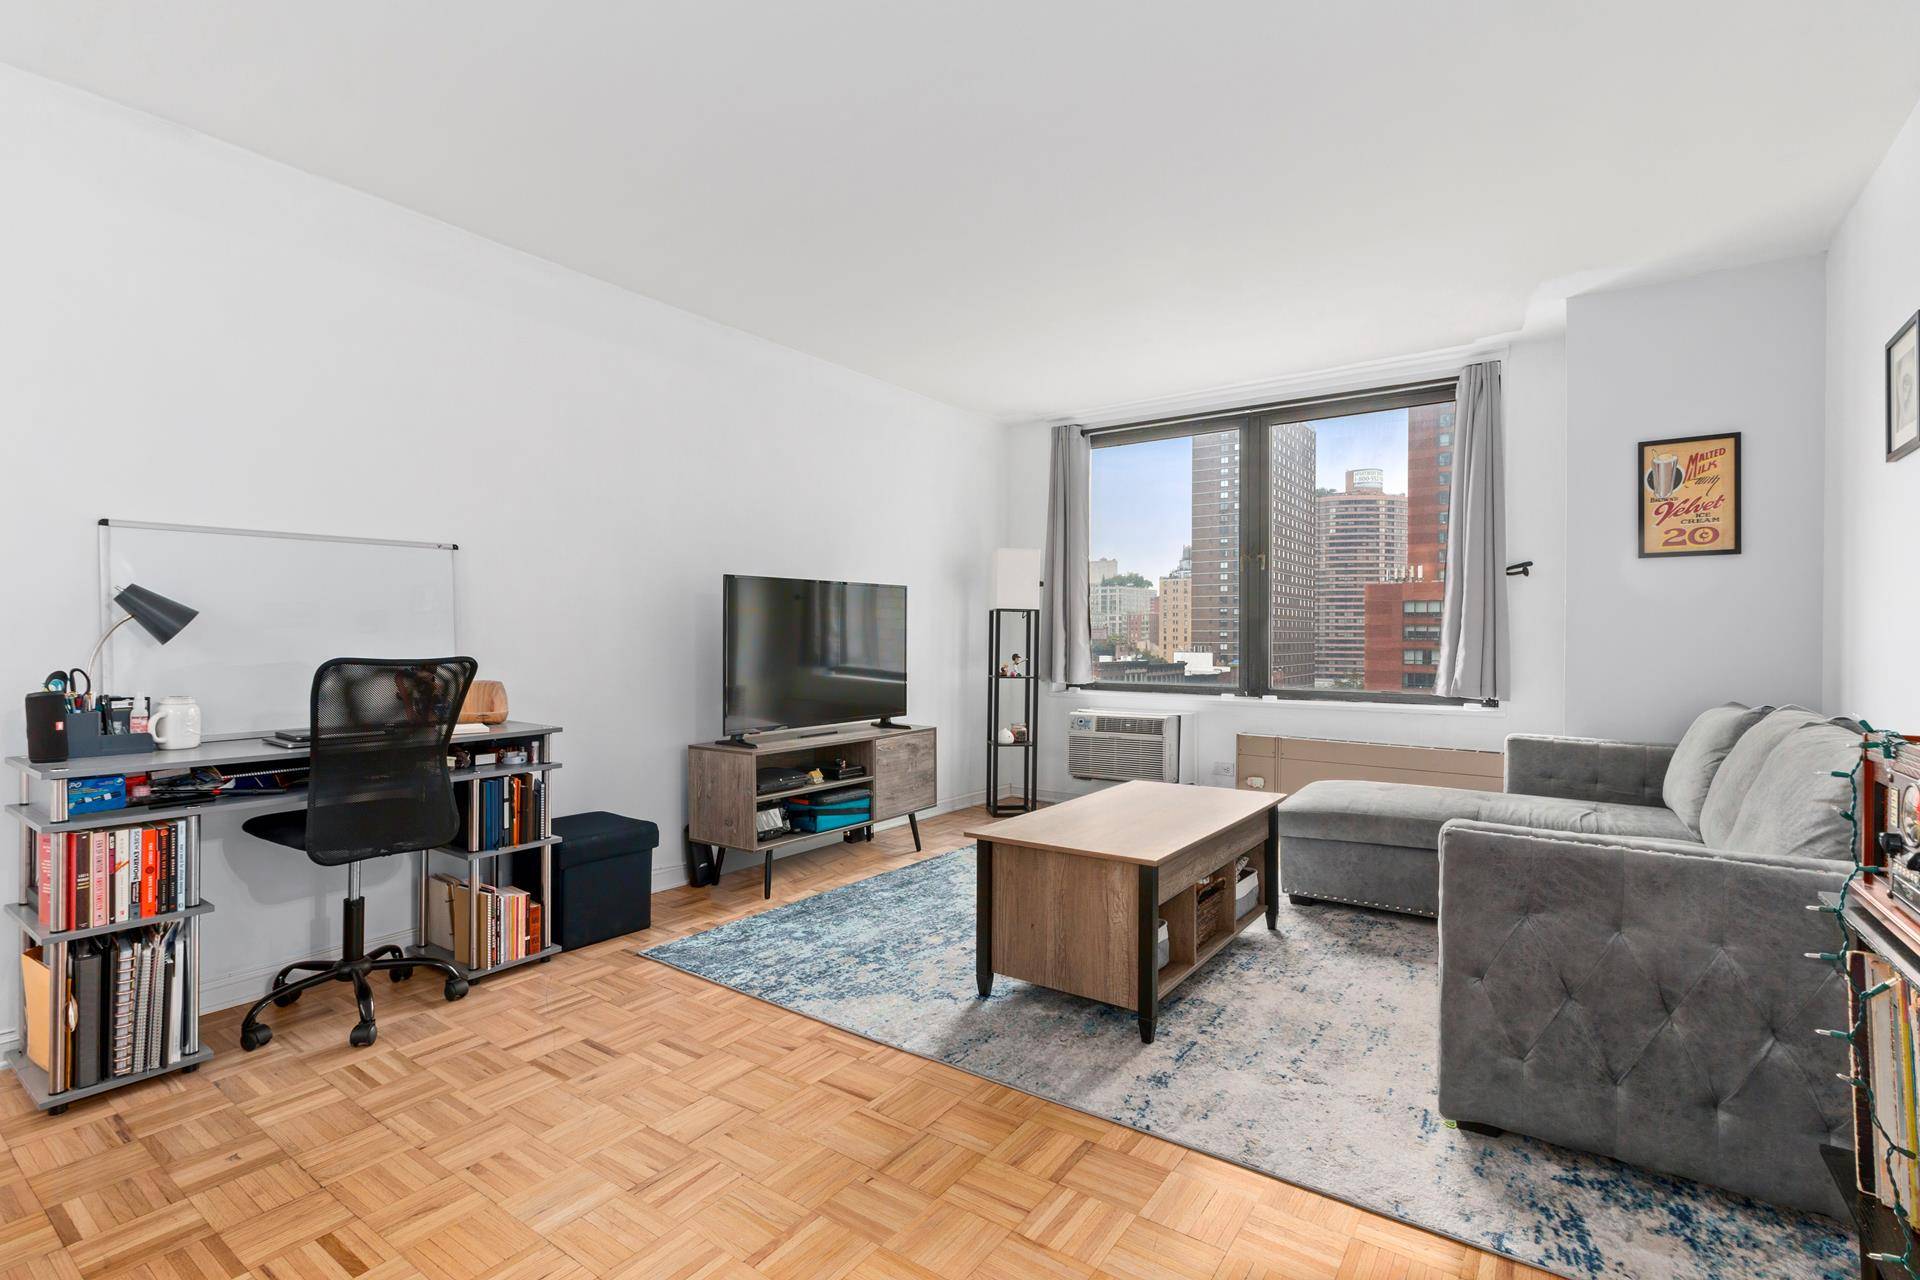 This is a renovated and spacious studio with bright northwestern views of the city skyline and oversized windows.